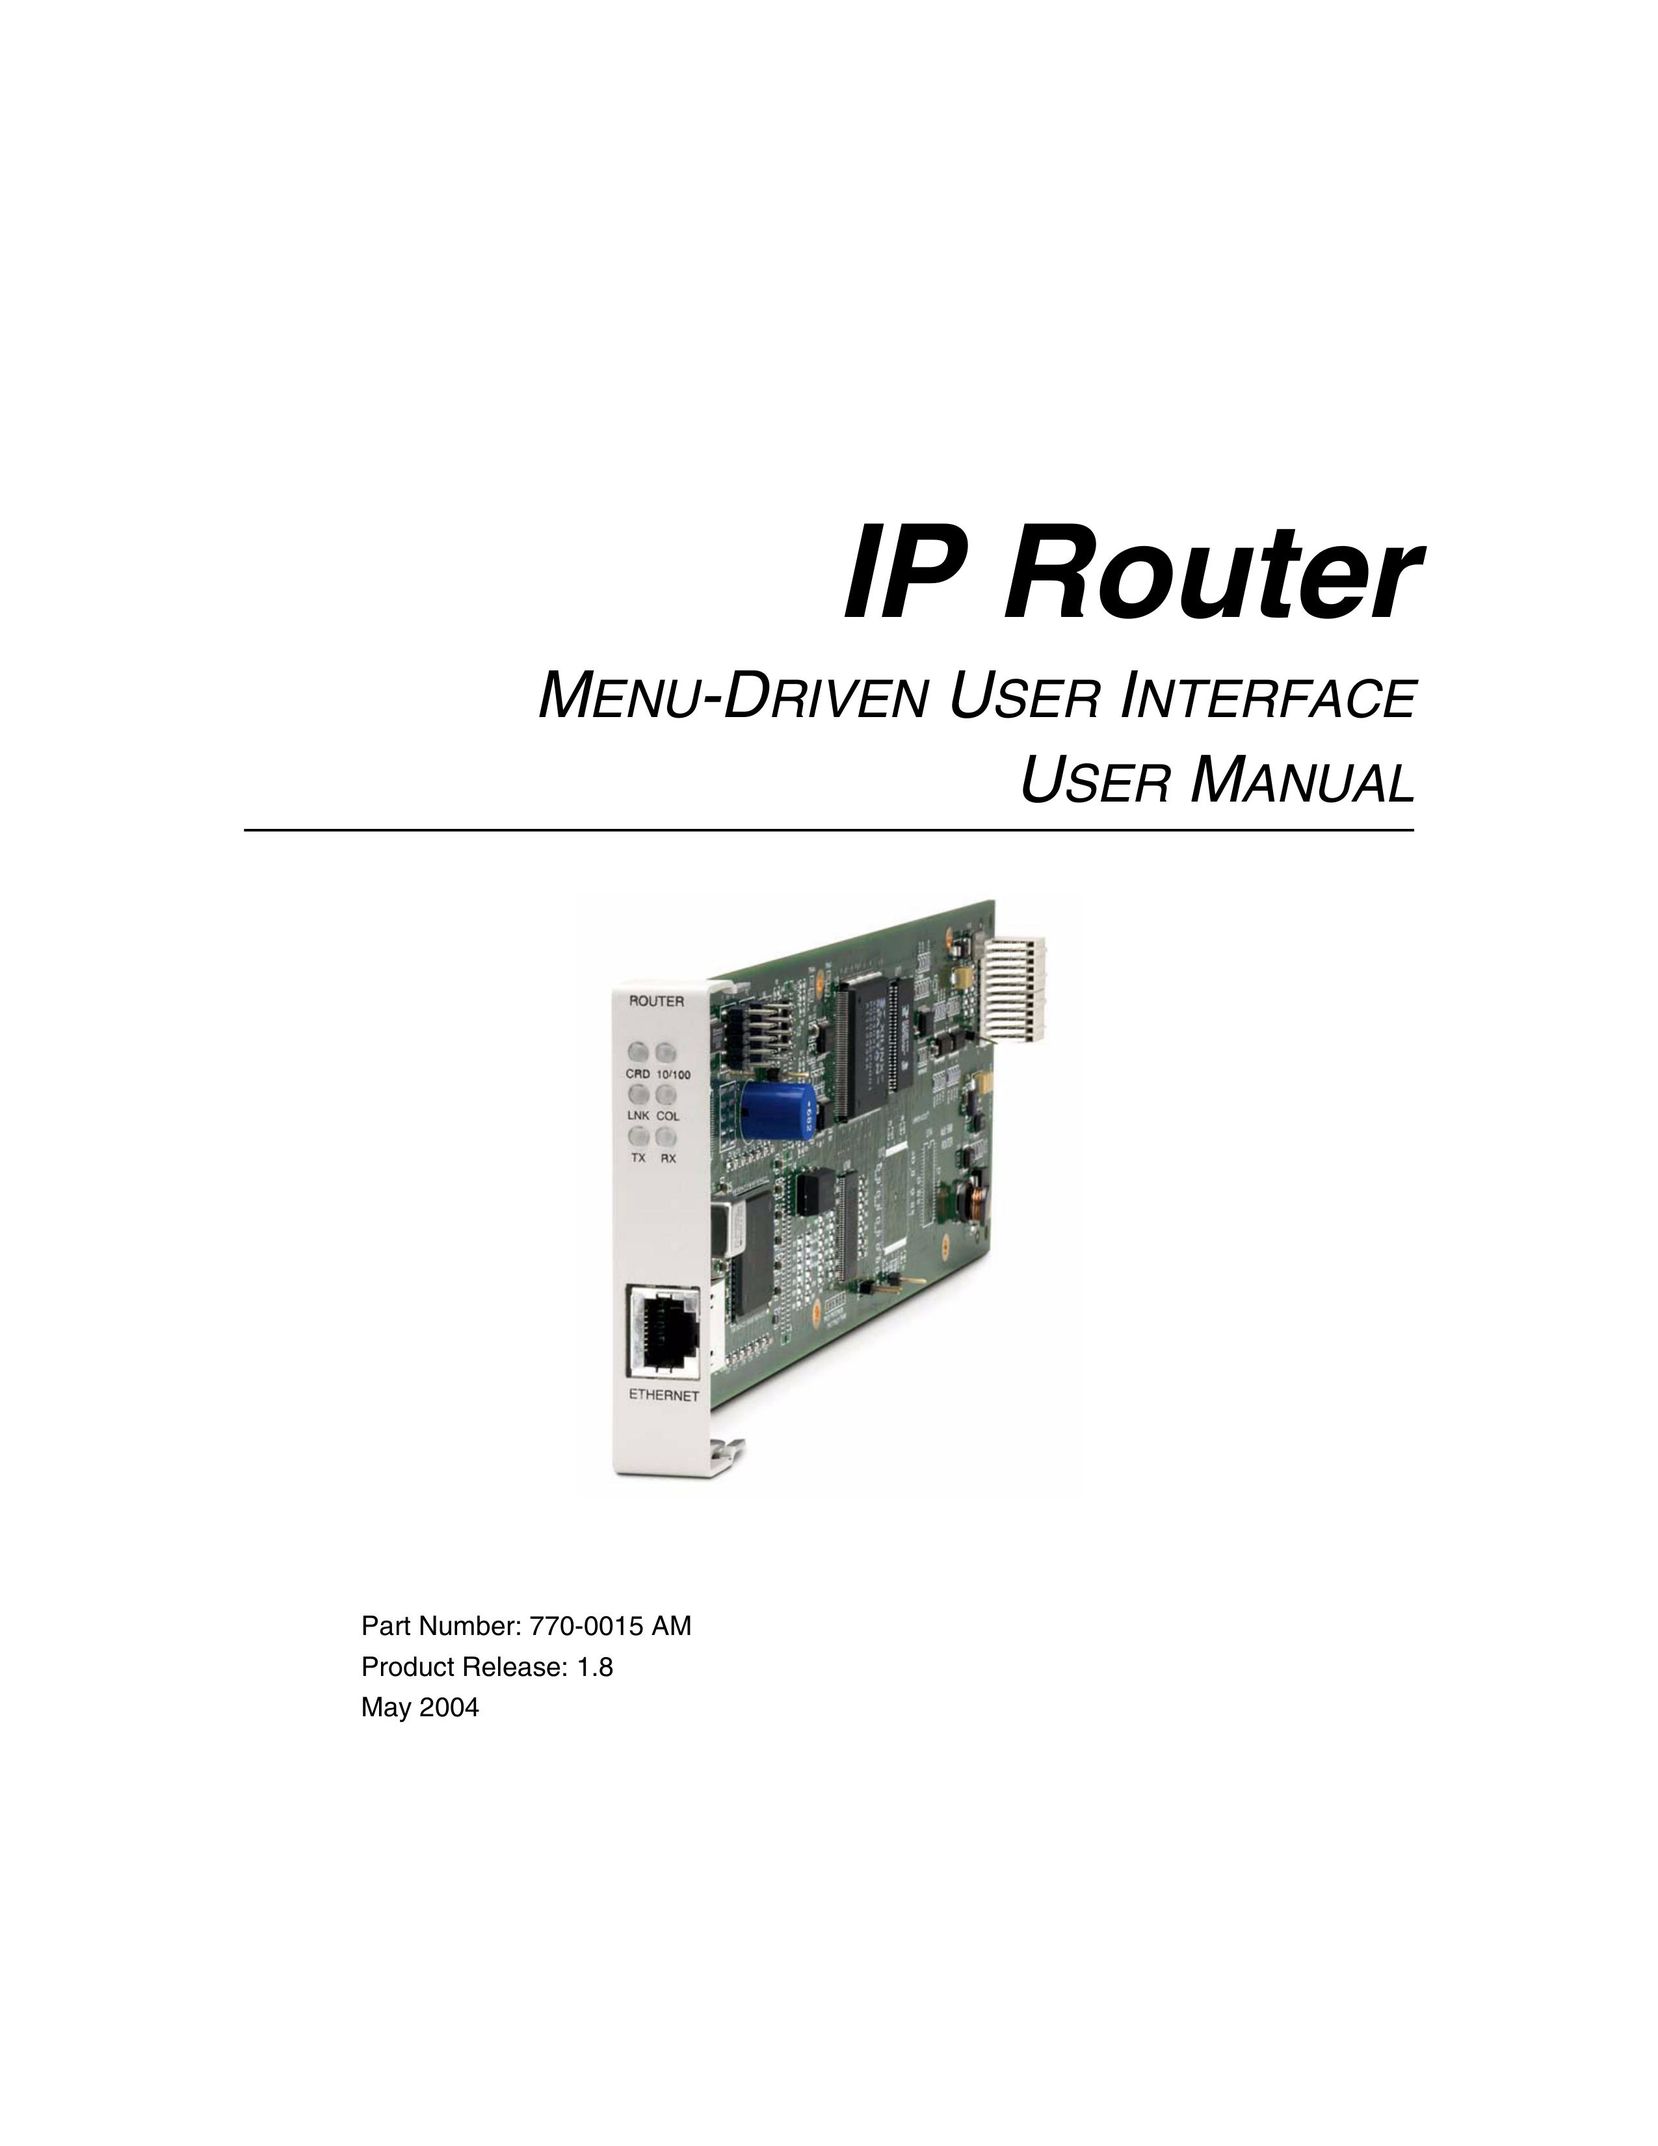 Carrier Access 770-0015 AM Network Router User Manual